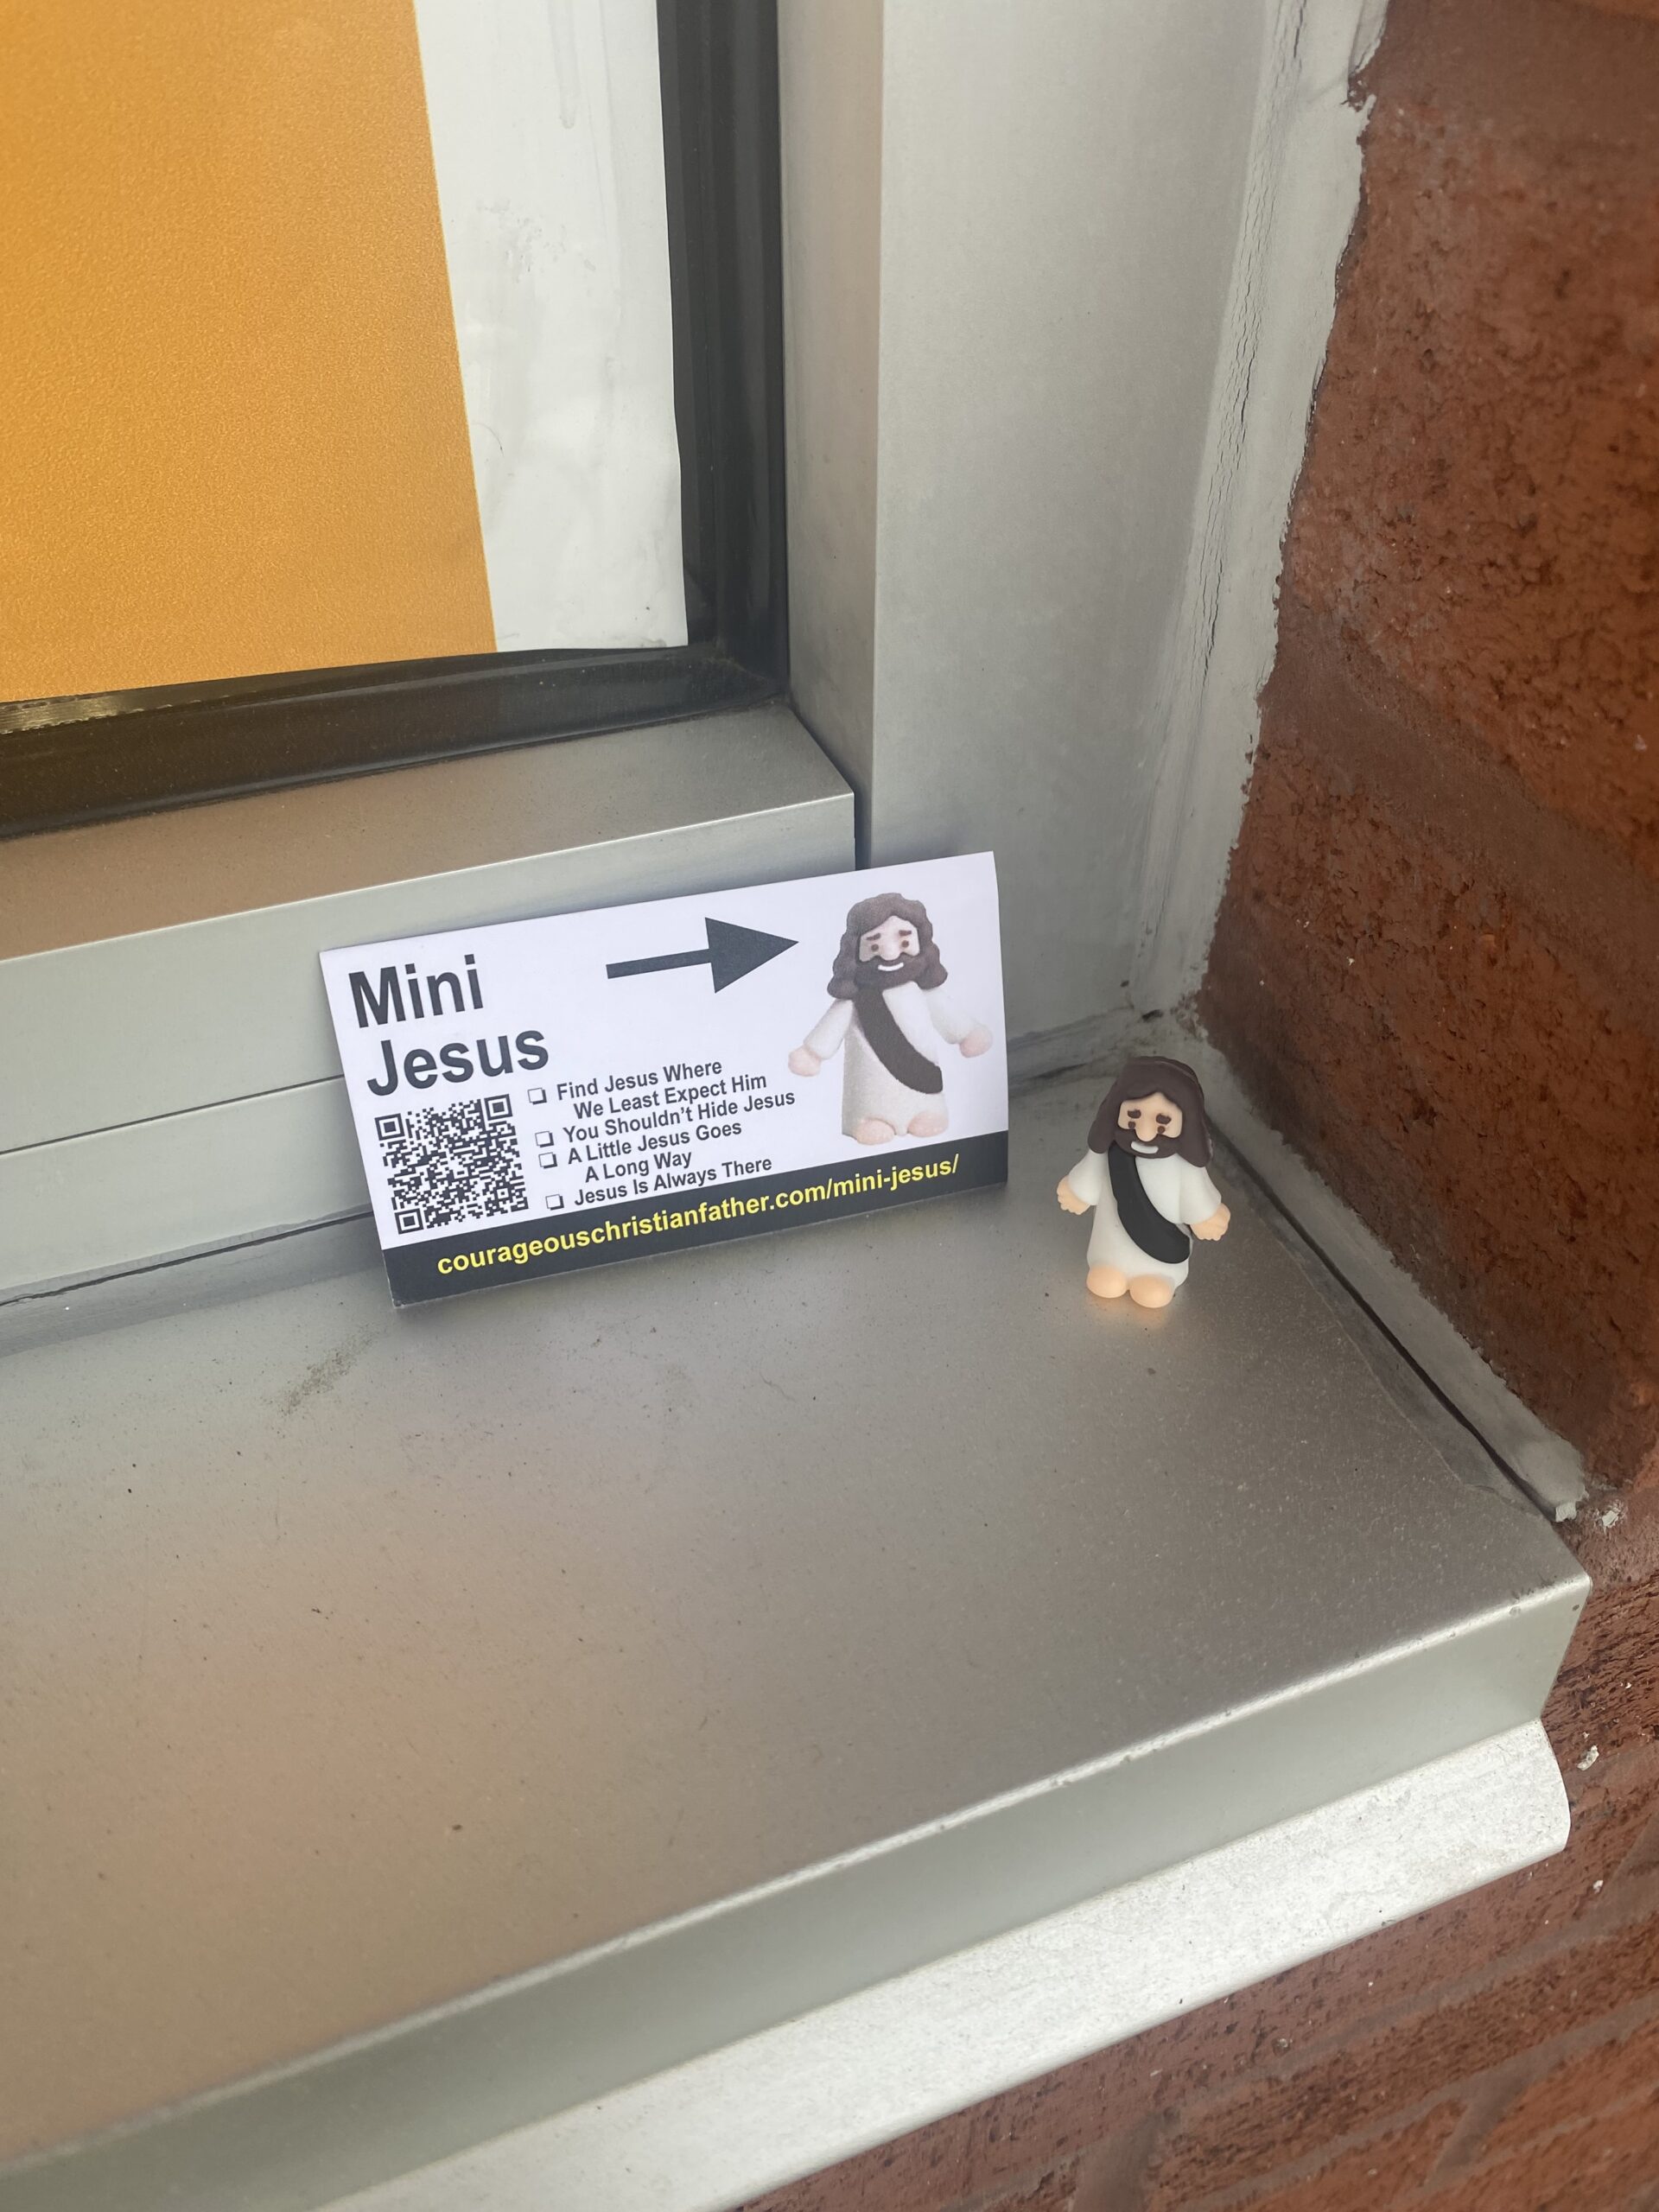 Some people have to met Jesus in a parking lot out side a McDonalds.
#MiniJesus #McDonalds 